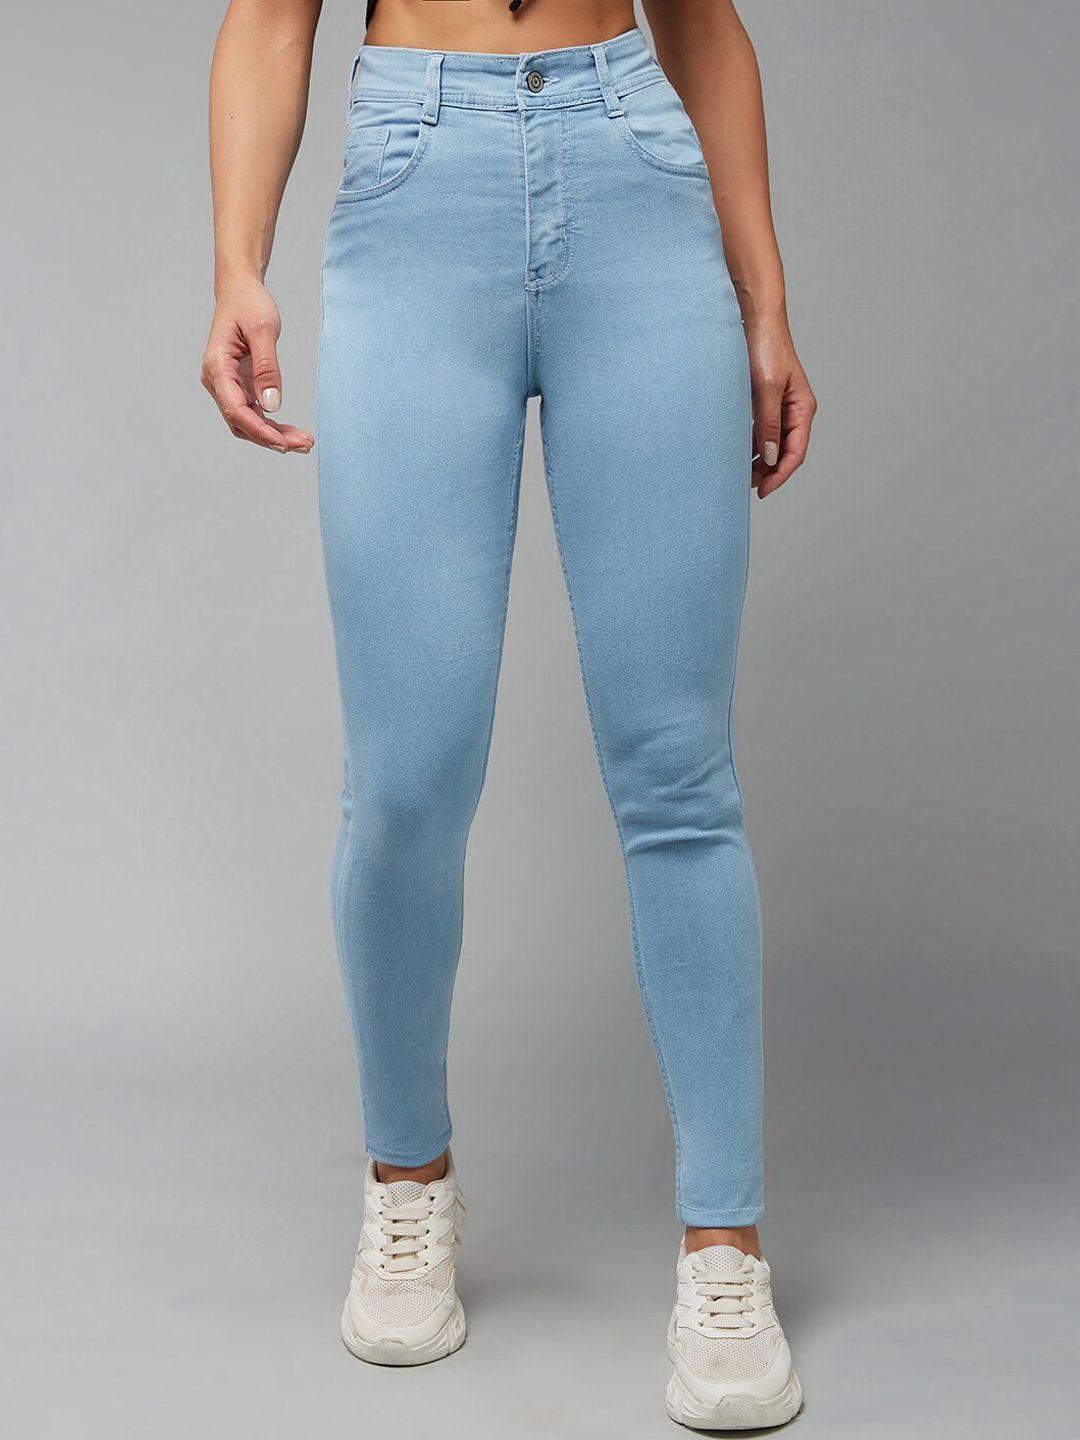 dolce-crudo-women-blue-skinny-fit-high-rise-stretchable-jeans